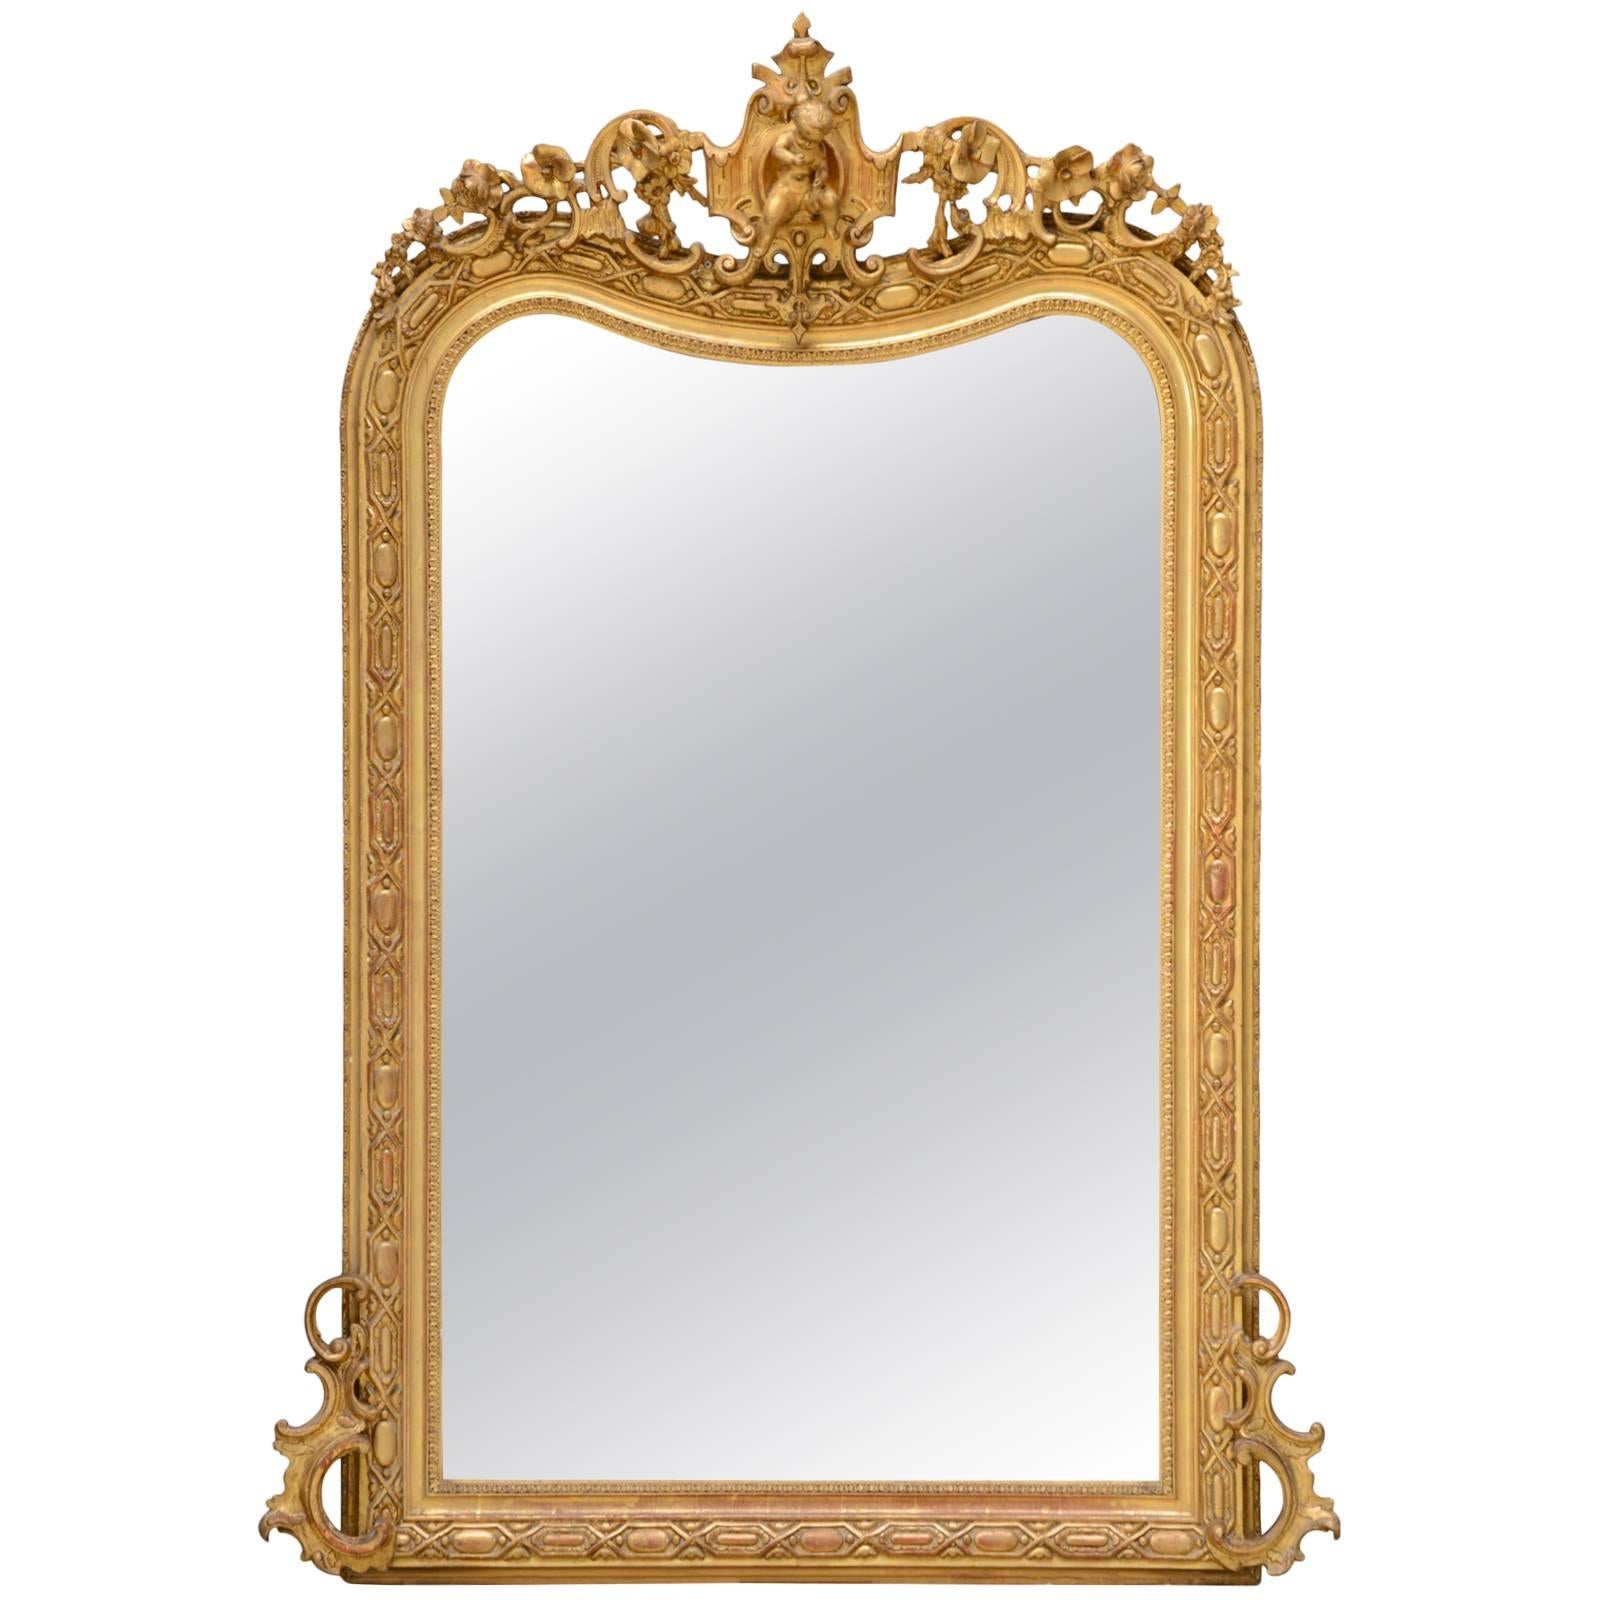 Napoleon III Period Gilded Wood and Stucco Mirror, 19th Century For Sale